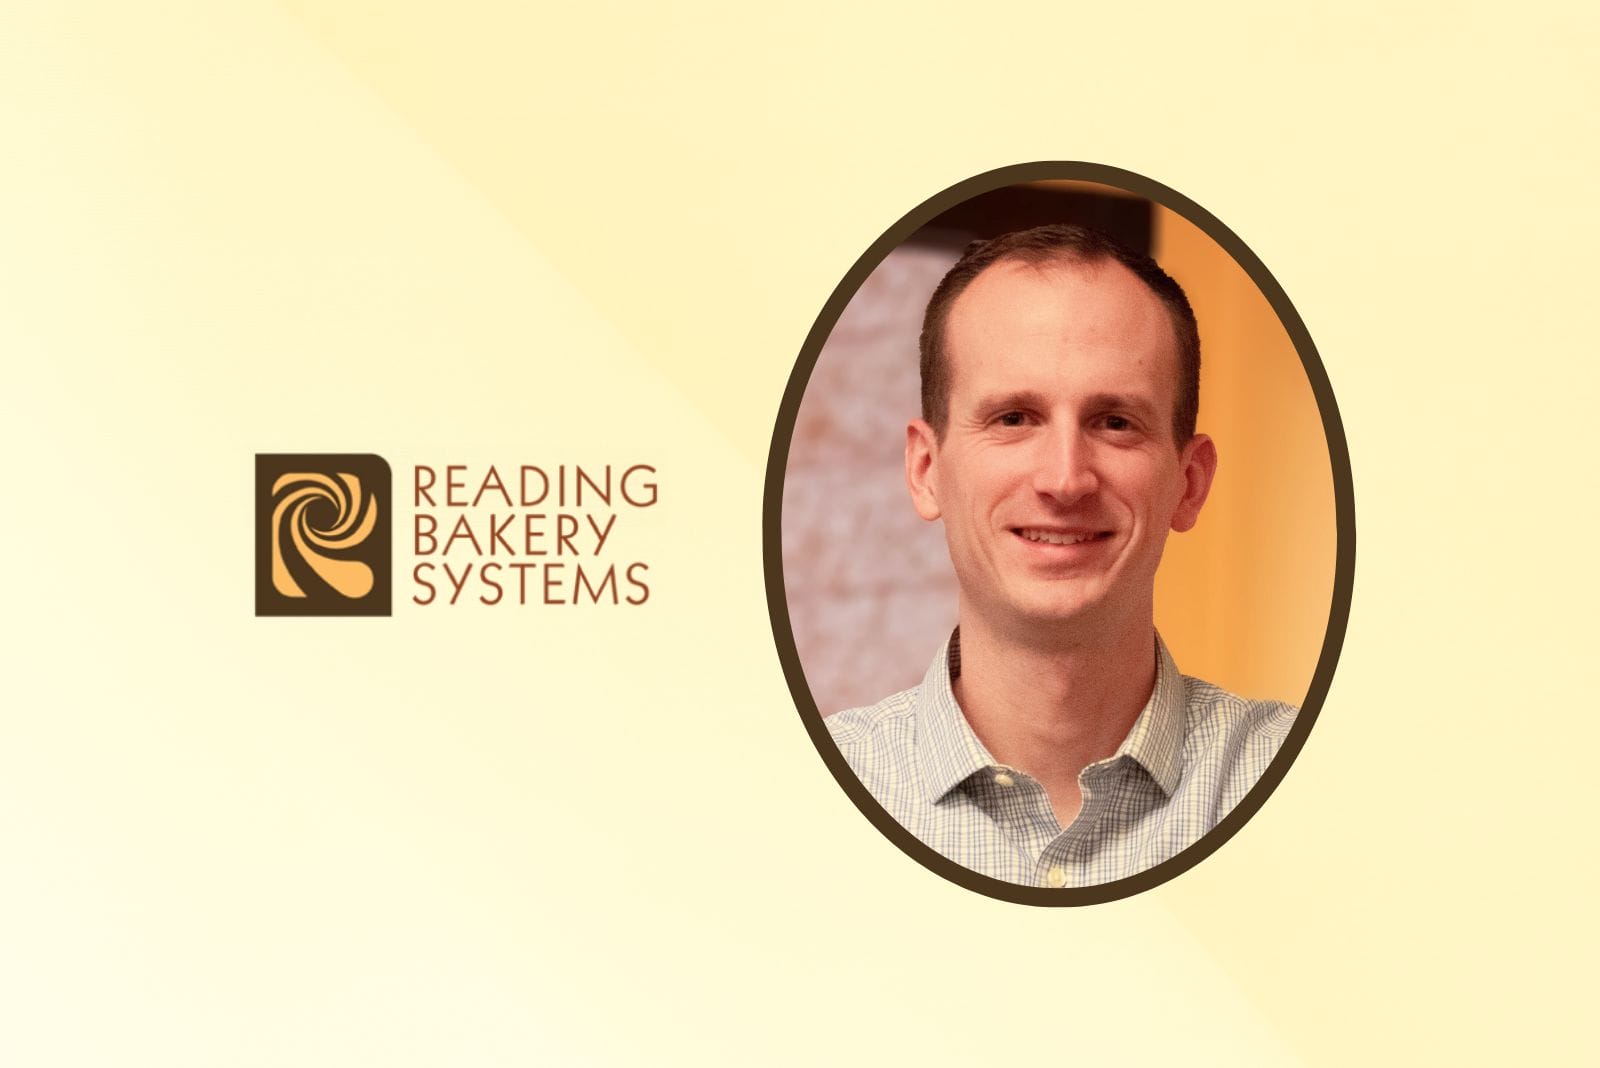 Reading Bakery Systems logo next to image of Kevin Bowes in an oval frame on a yellow background